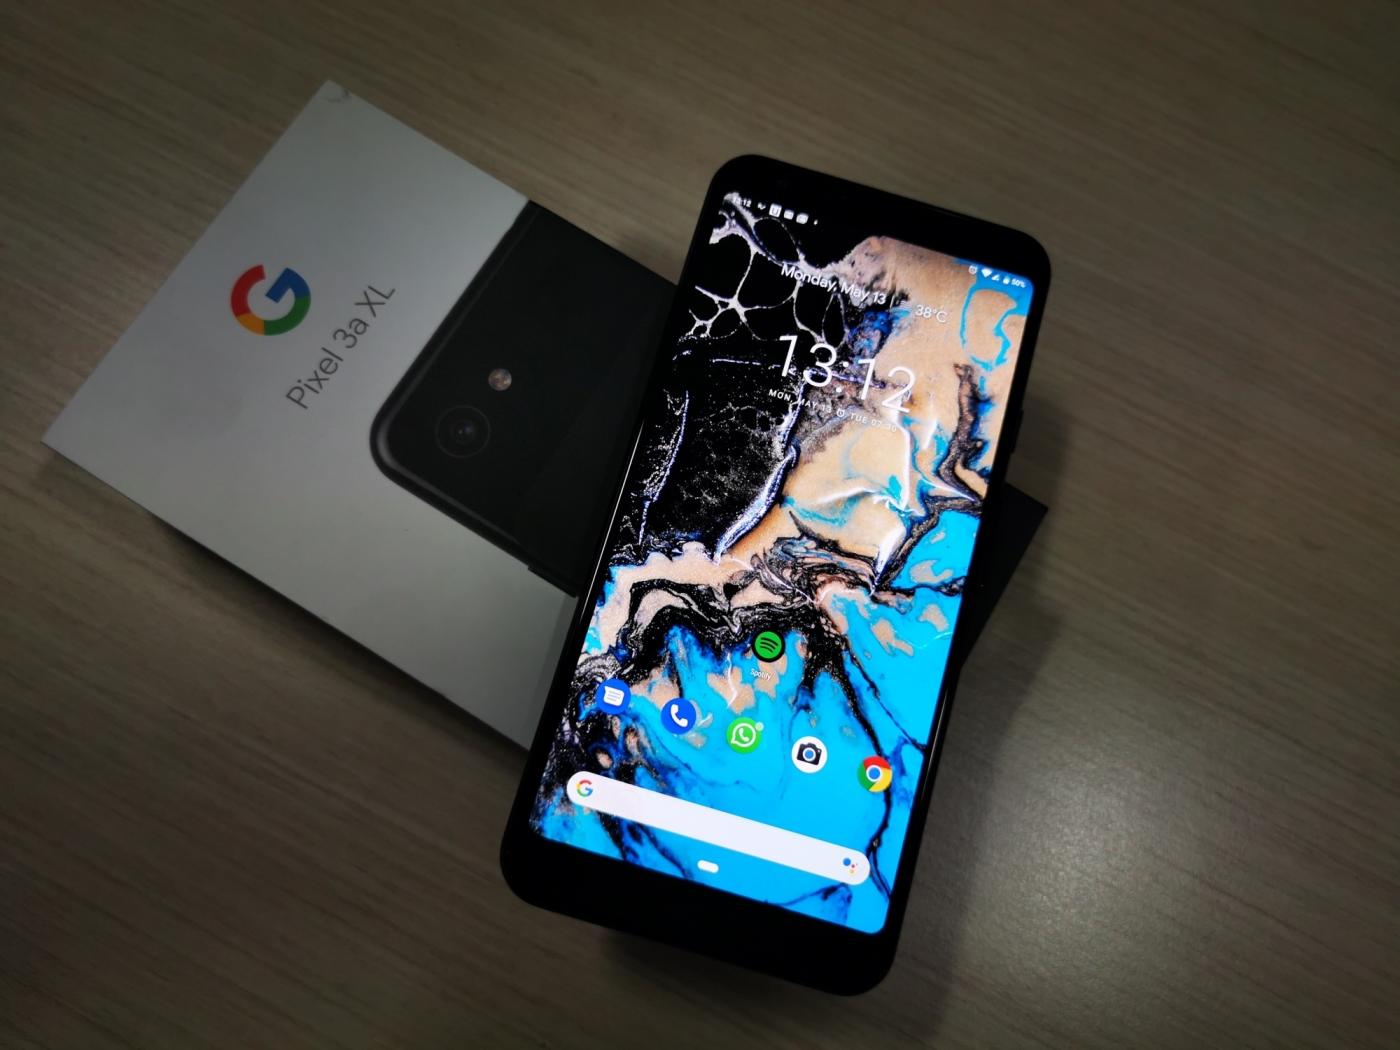 Google Pixel 3 and Pixel 3XL were incredible camera phones but that did not translate into great sales. Now, with cheaper Pixel 3a and 3aXL, the company aims to give a tough competition to OnePlus which has been dominating the Rs 40,000-Rs 50,000 price segment. by .